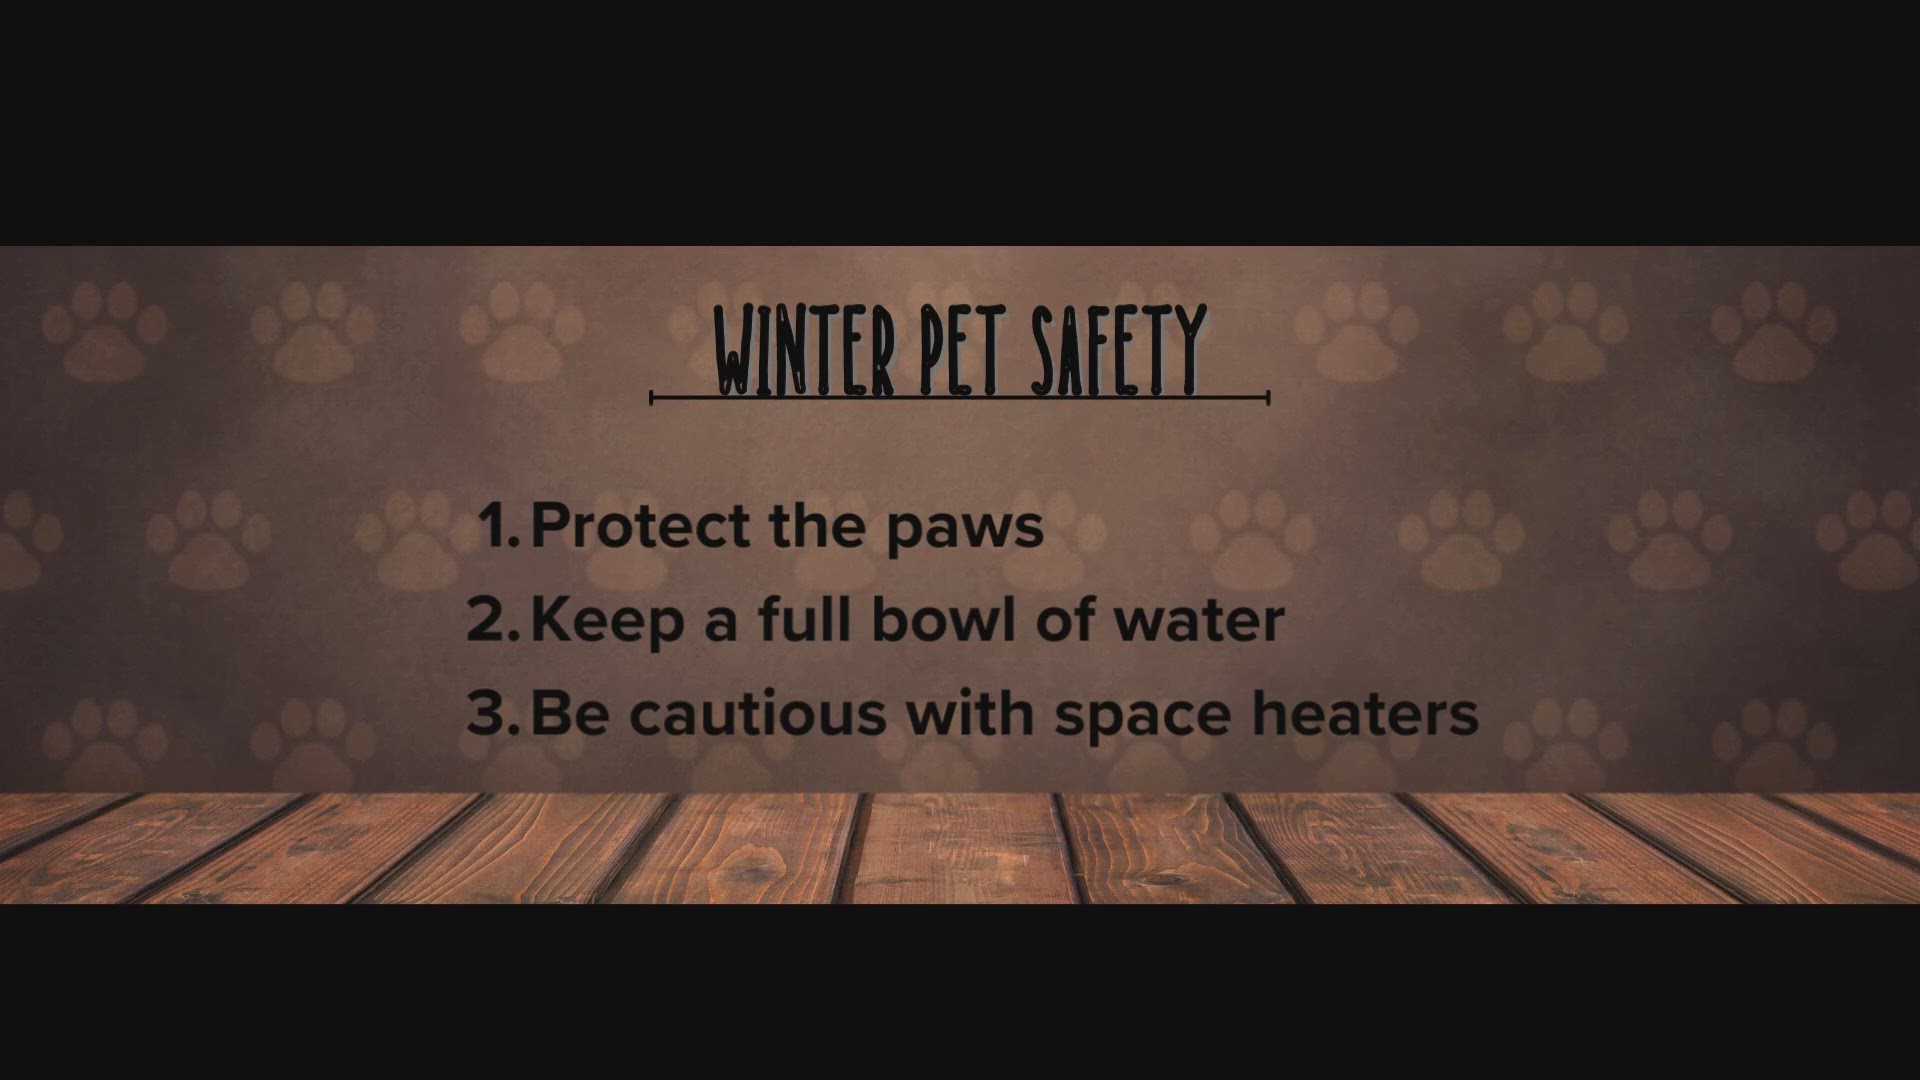 Veterinarians encourage protecting your pet's paws, keeping their water bowls full, and watching them around space heaters.